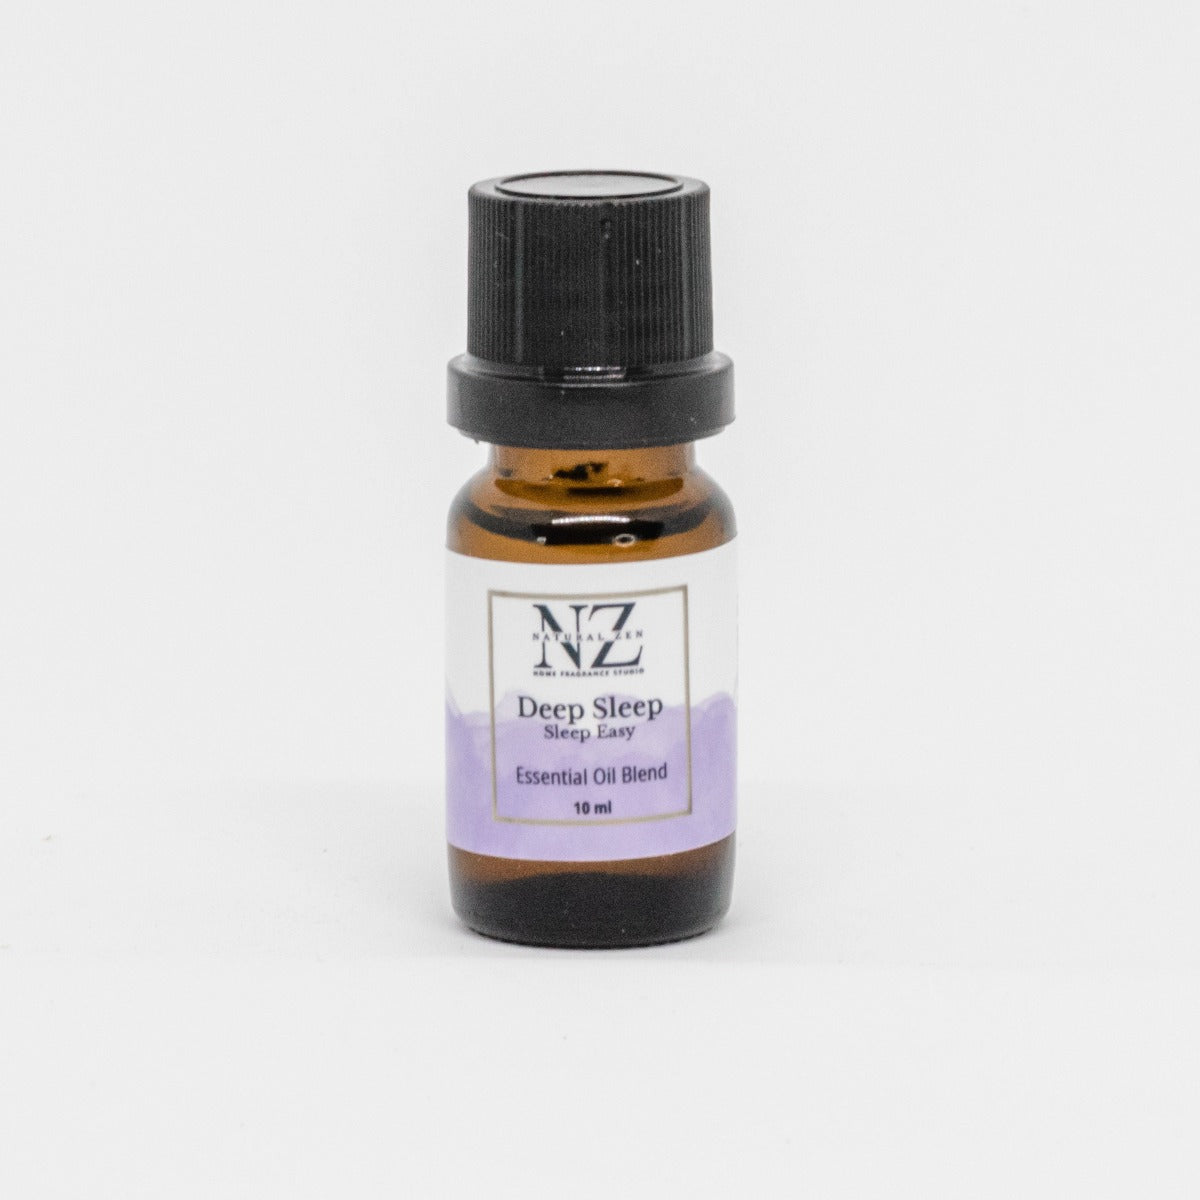 Experience a deeper sleep with the help of Nature. DEEP SLEEP is our proprietary essential oil blend of Cedarwood, Frankincense and Lavender essential oils. Our DEEP SLEEP essential oil blend works on your parasympathetic nervous system to help you relax into a deeper sleep state